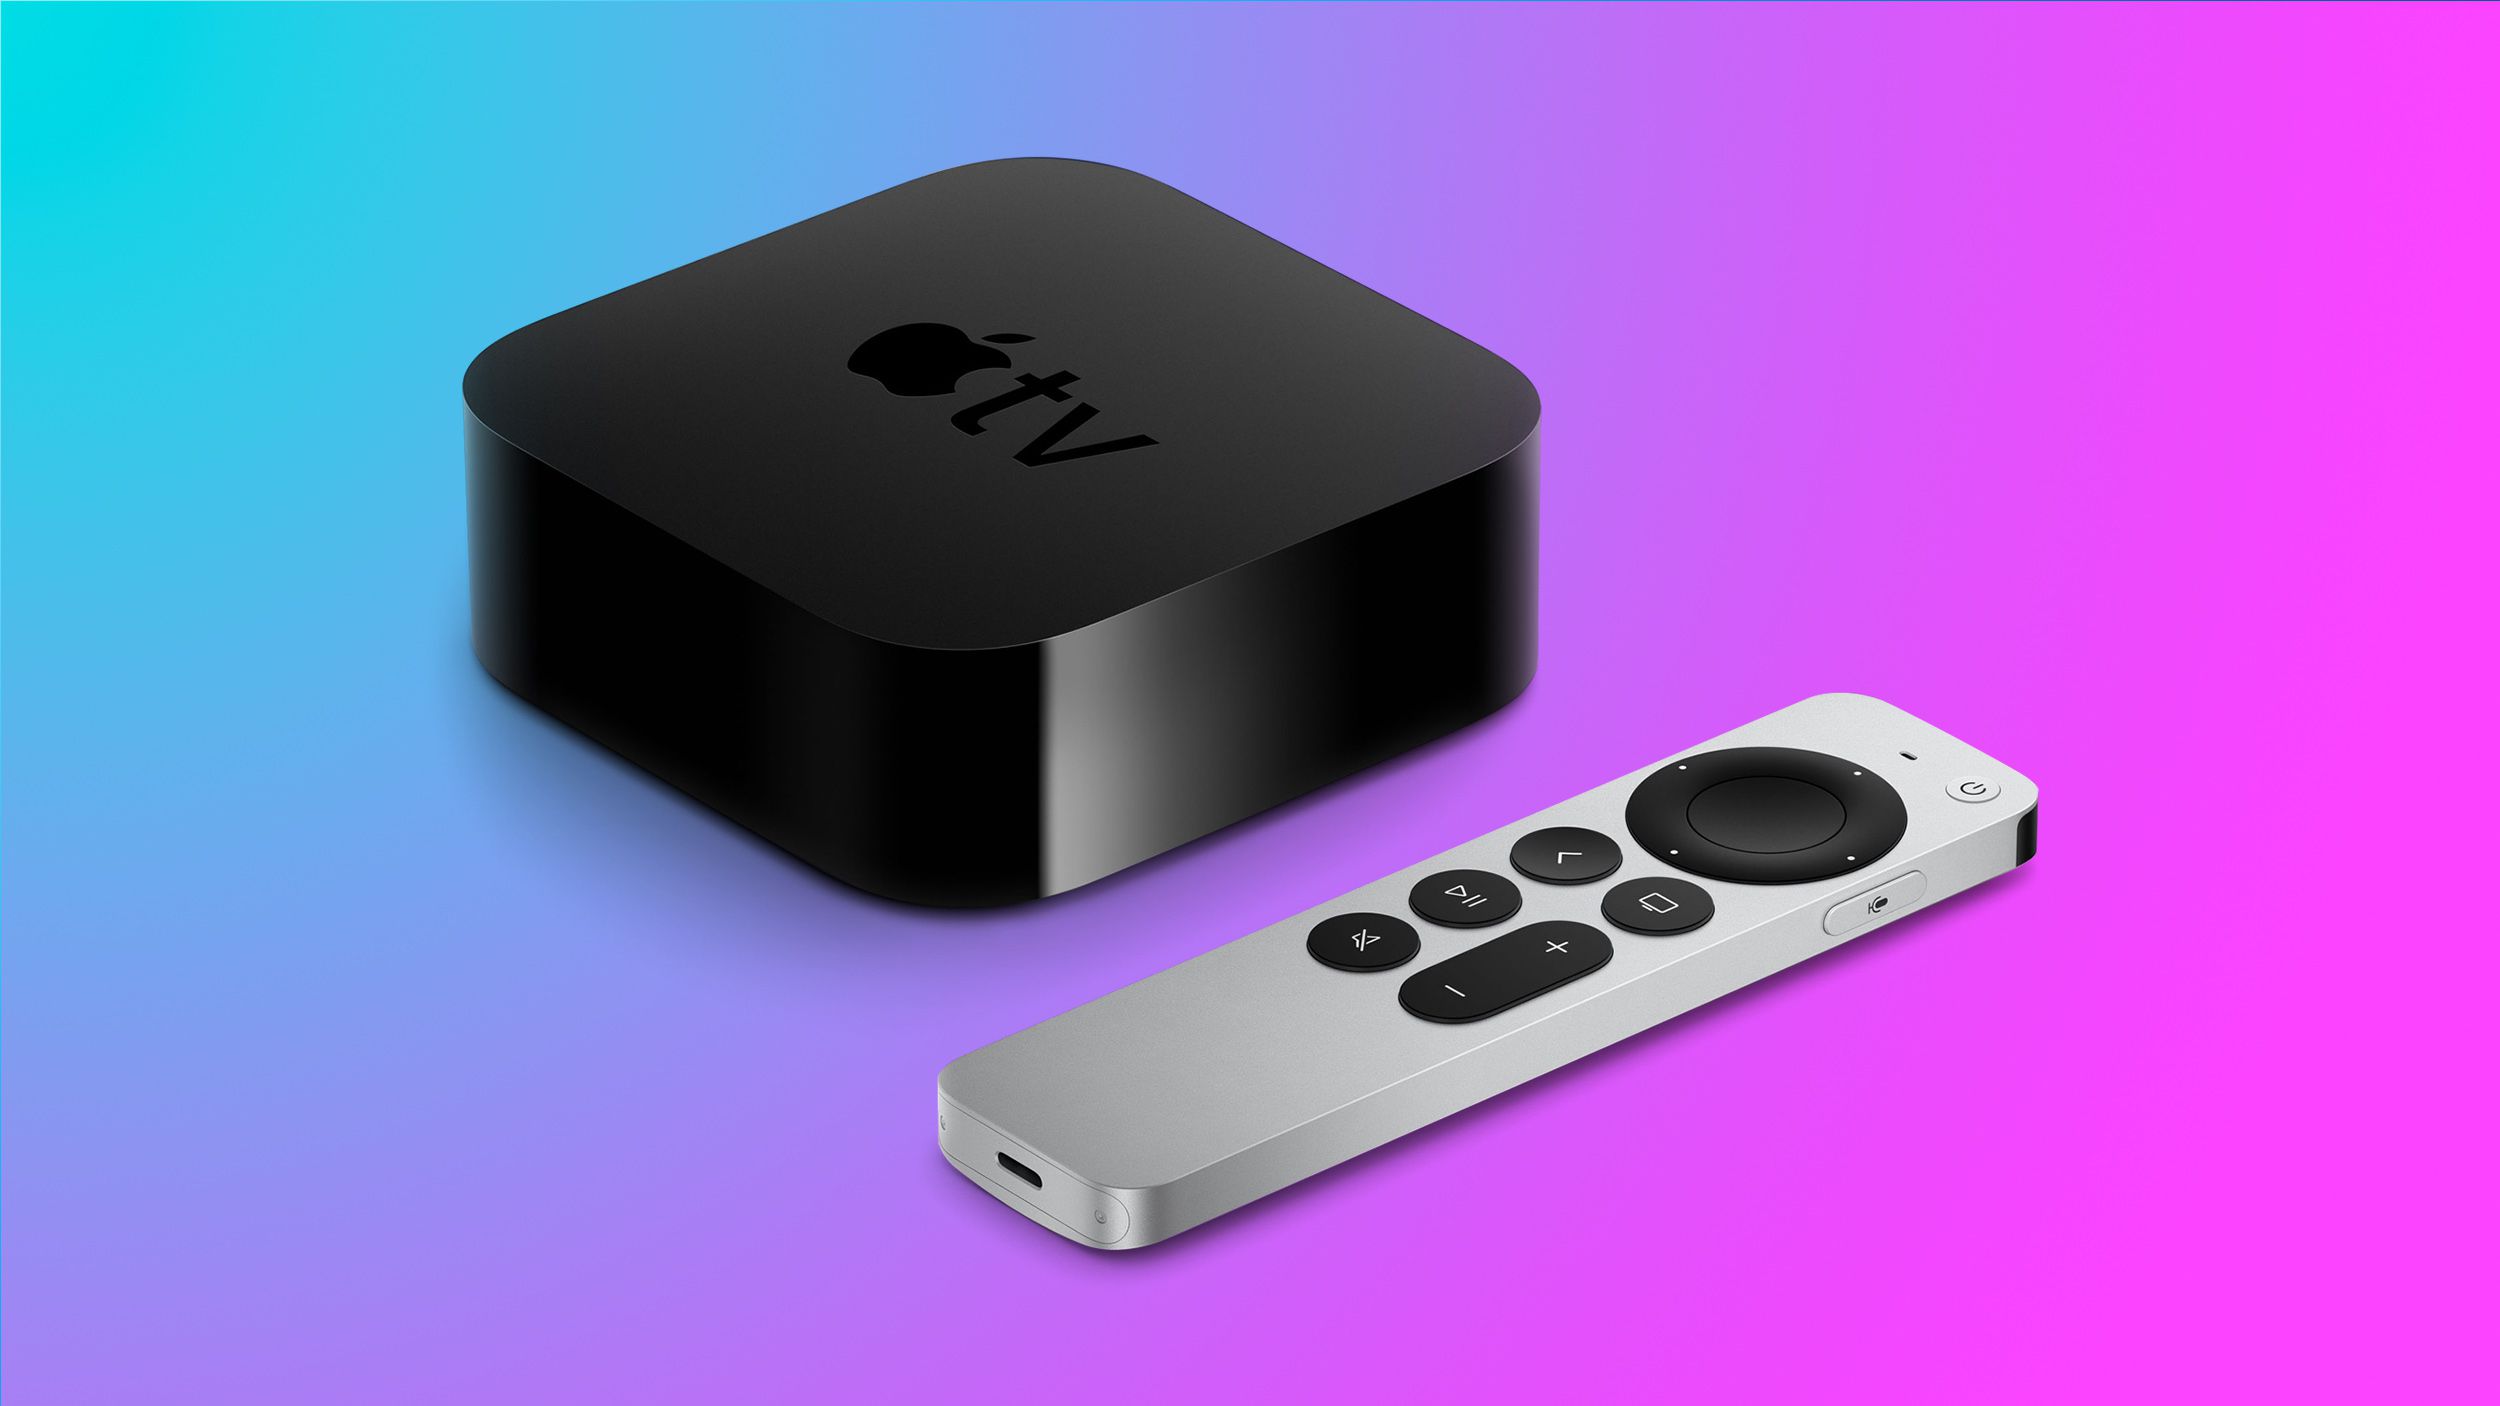 Deals: Amazon Discounts 32GB Apple TV 4K to Match All-Time Low 